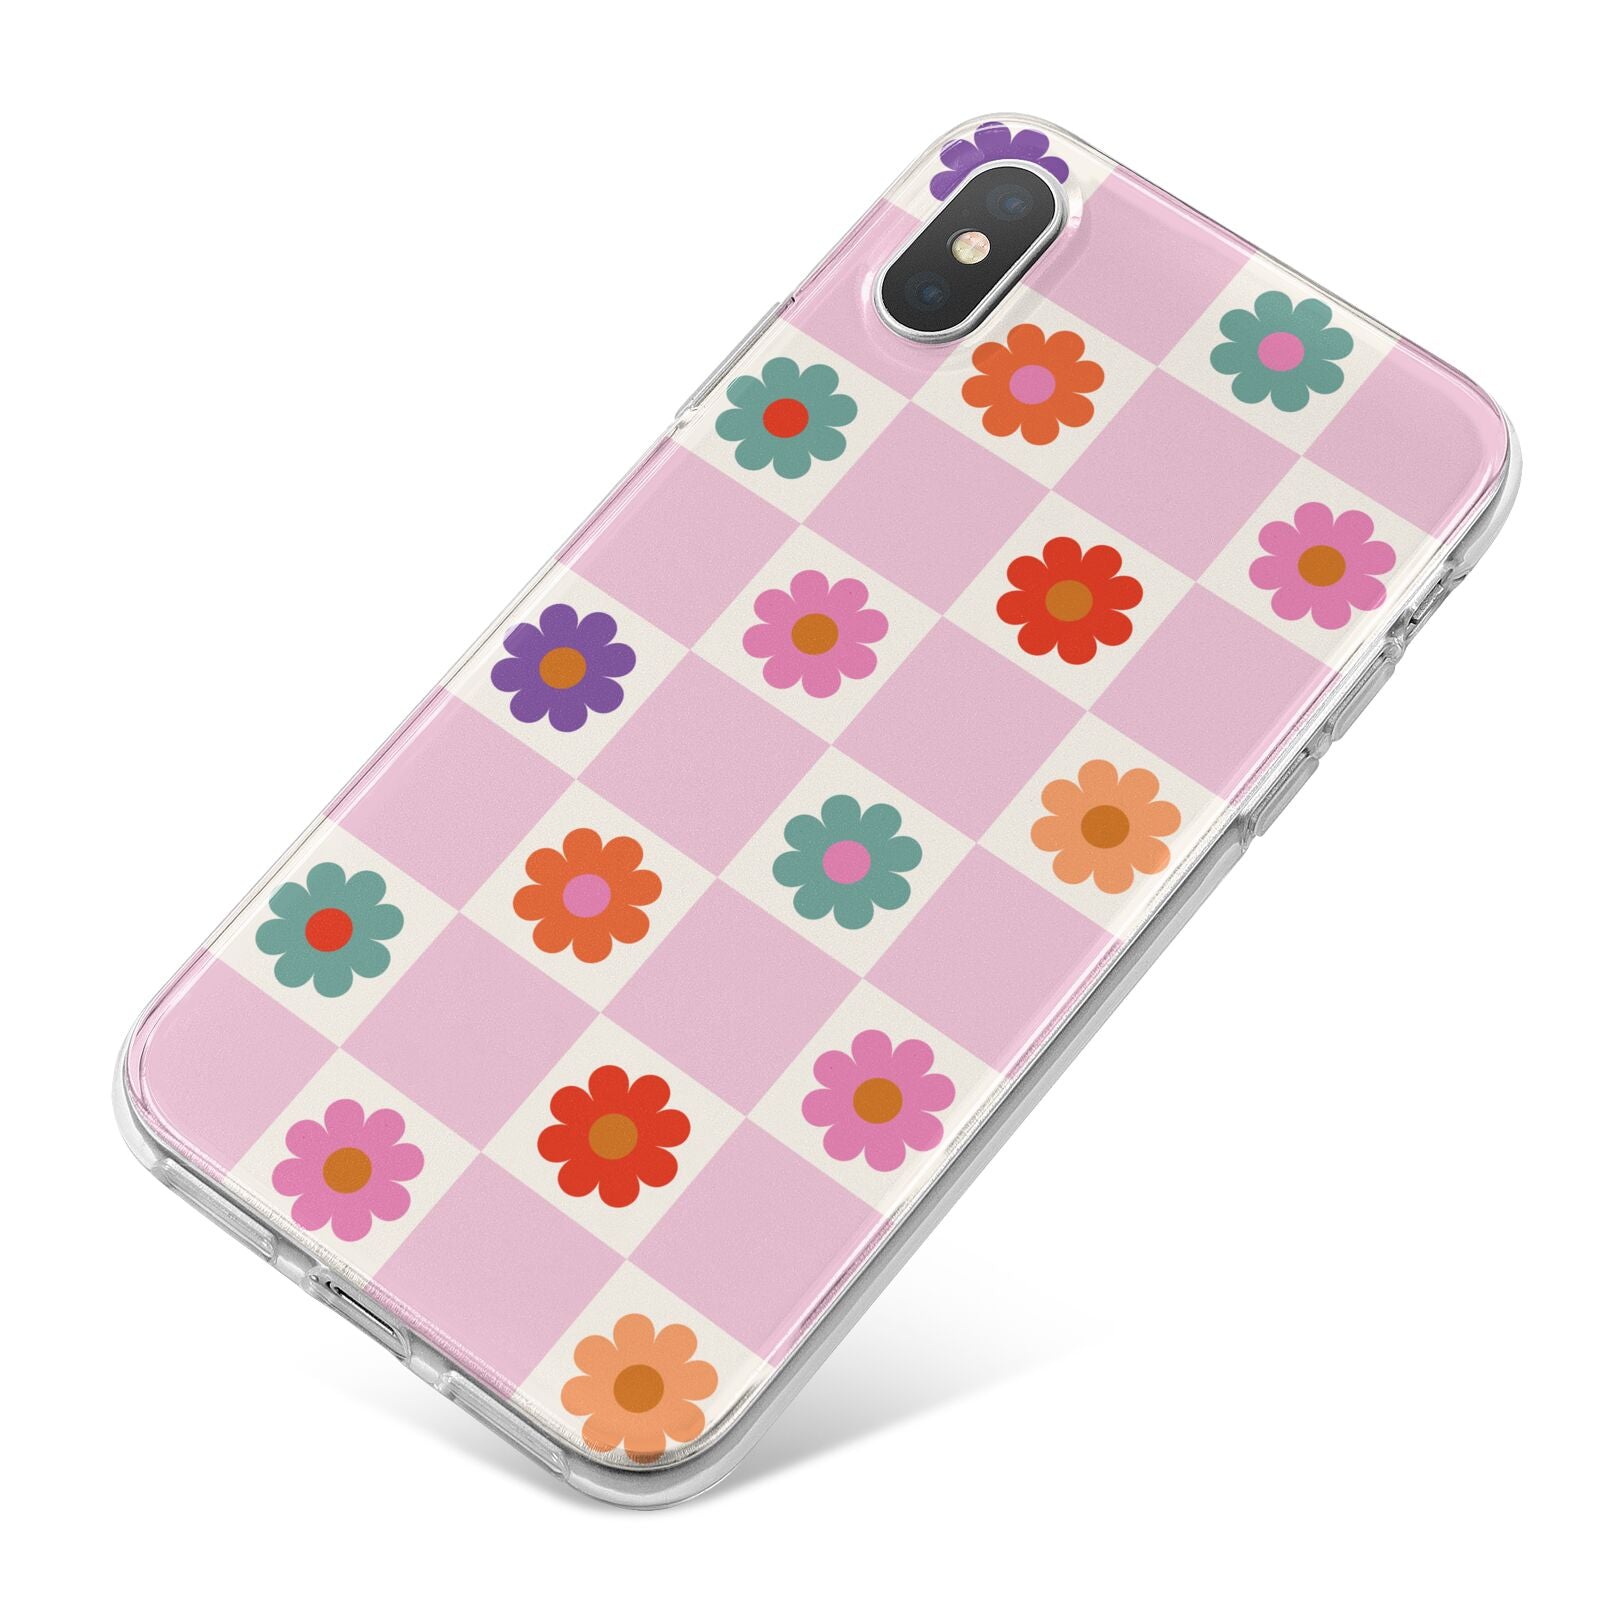 Checked flowers iPhone X Bumper Case on Silver iPhone